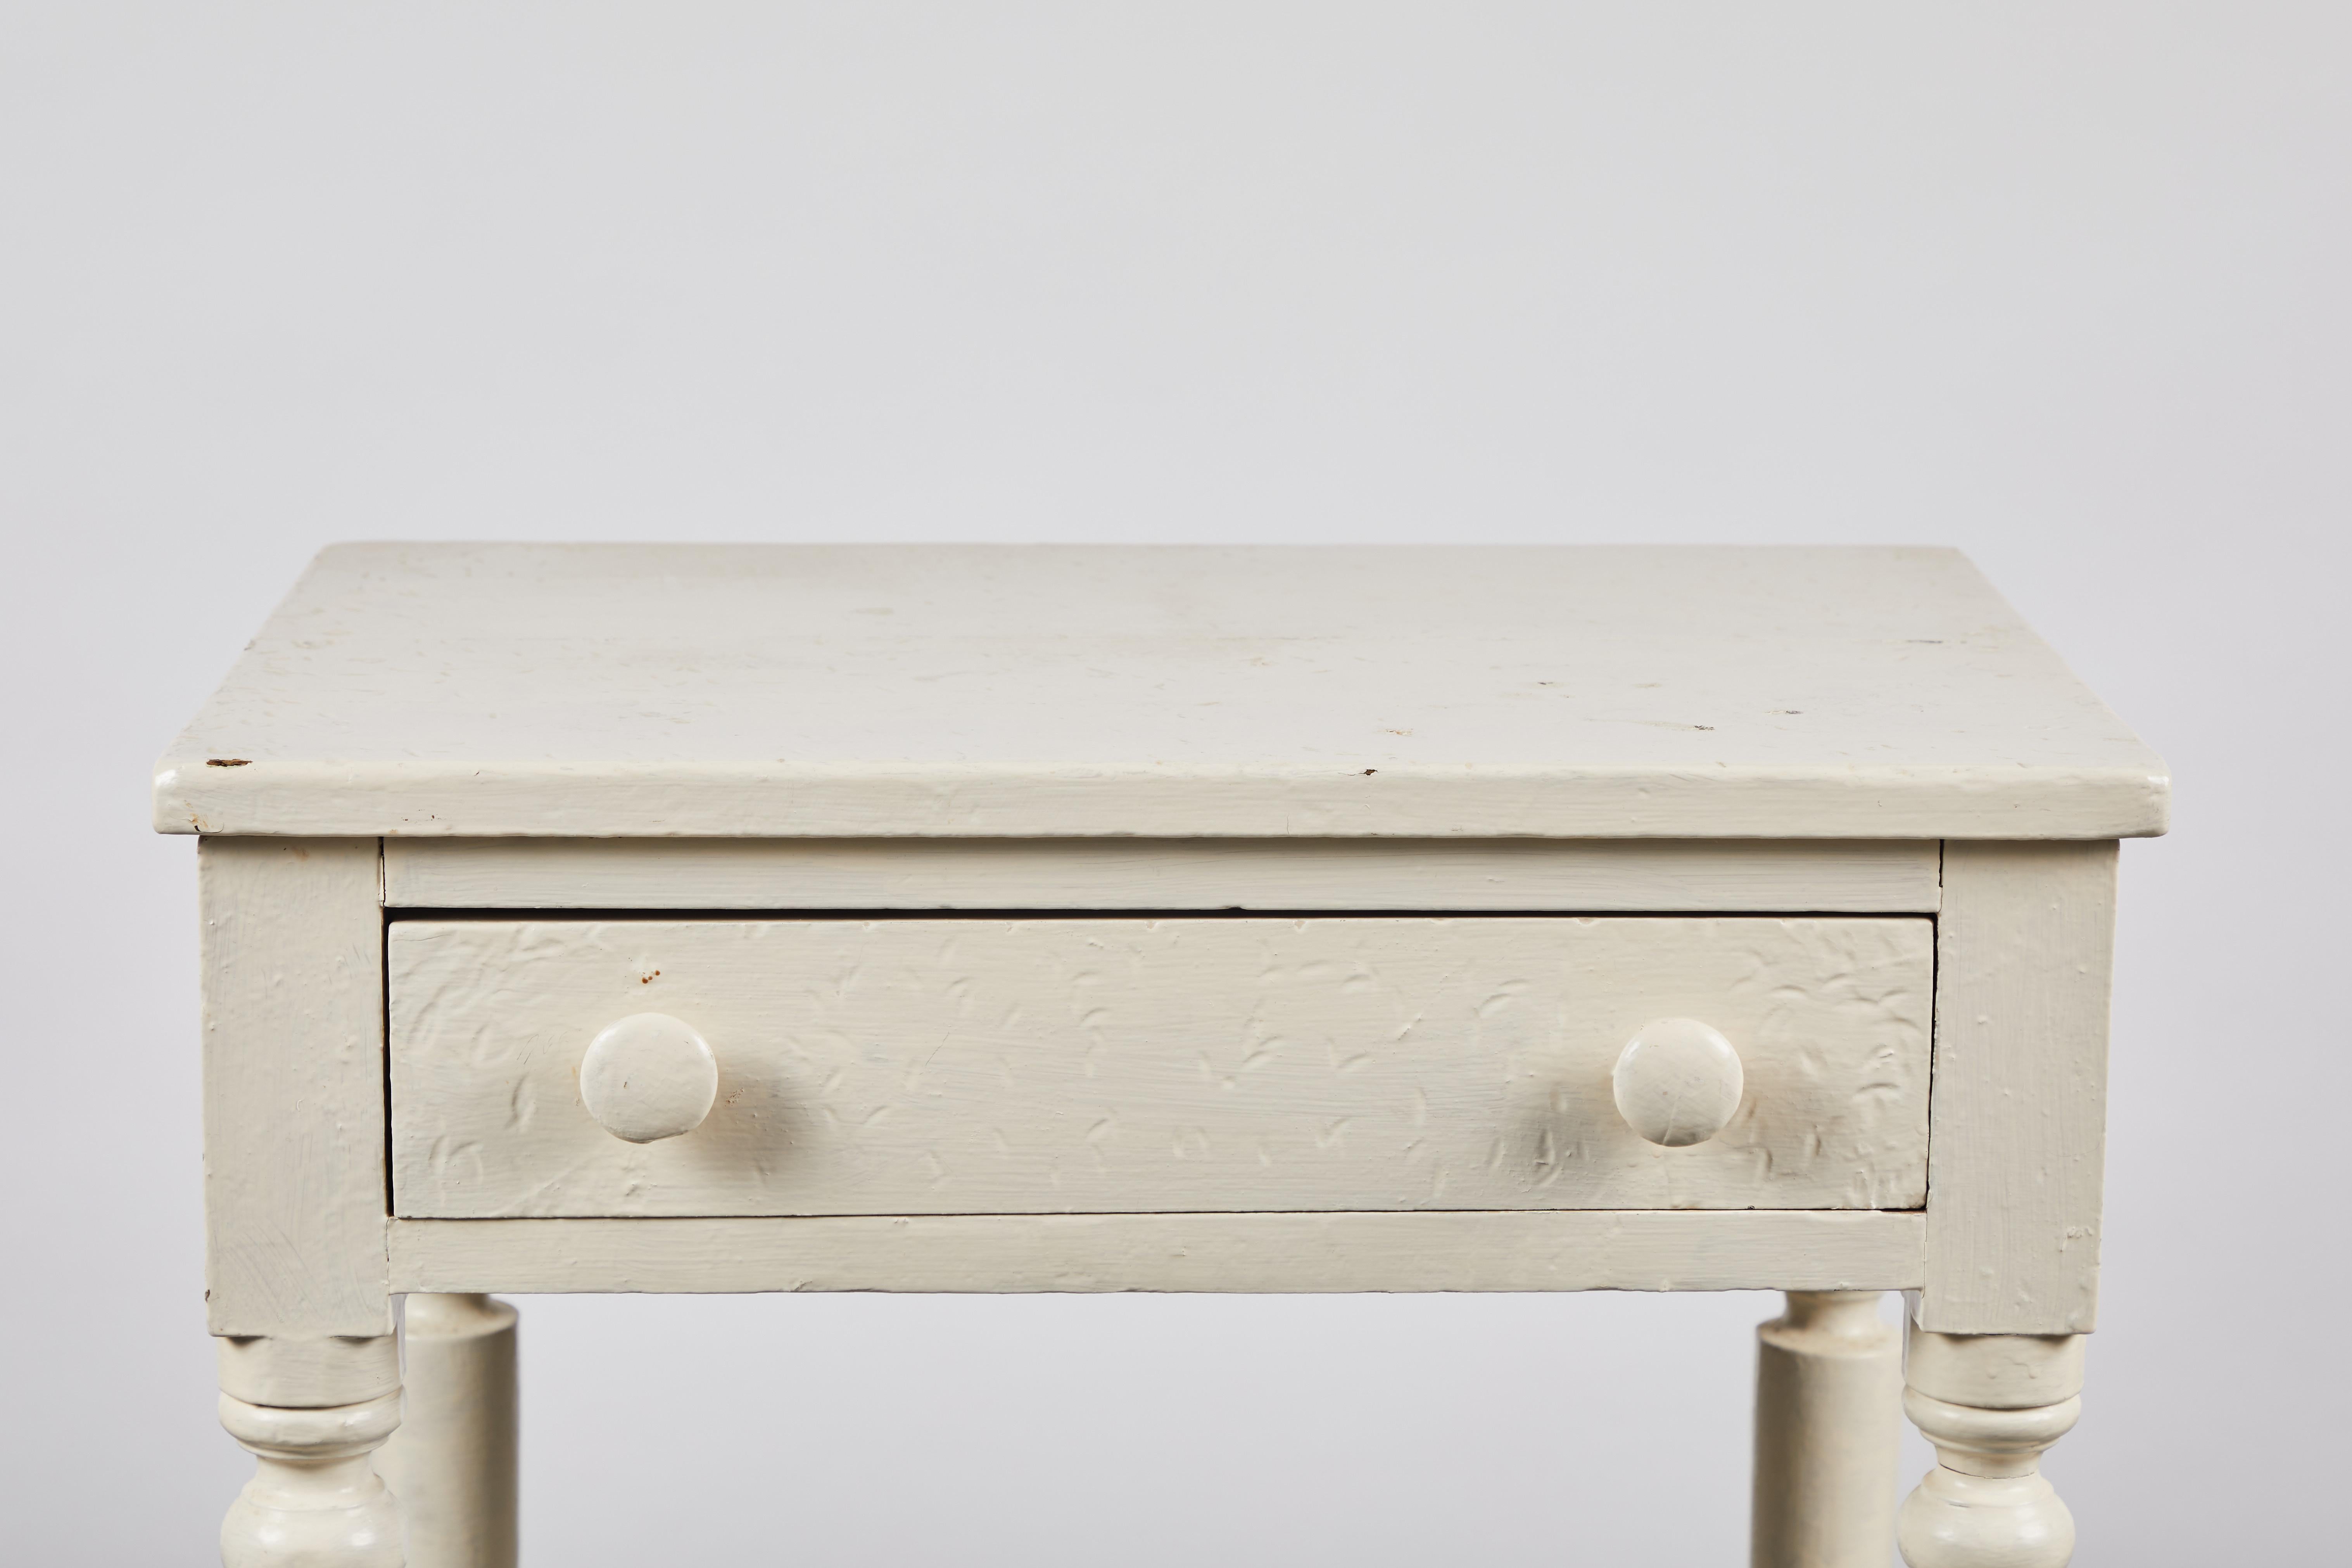 20th Century Early American White Painted Side Table